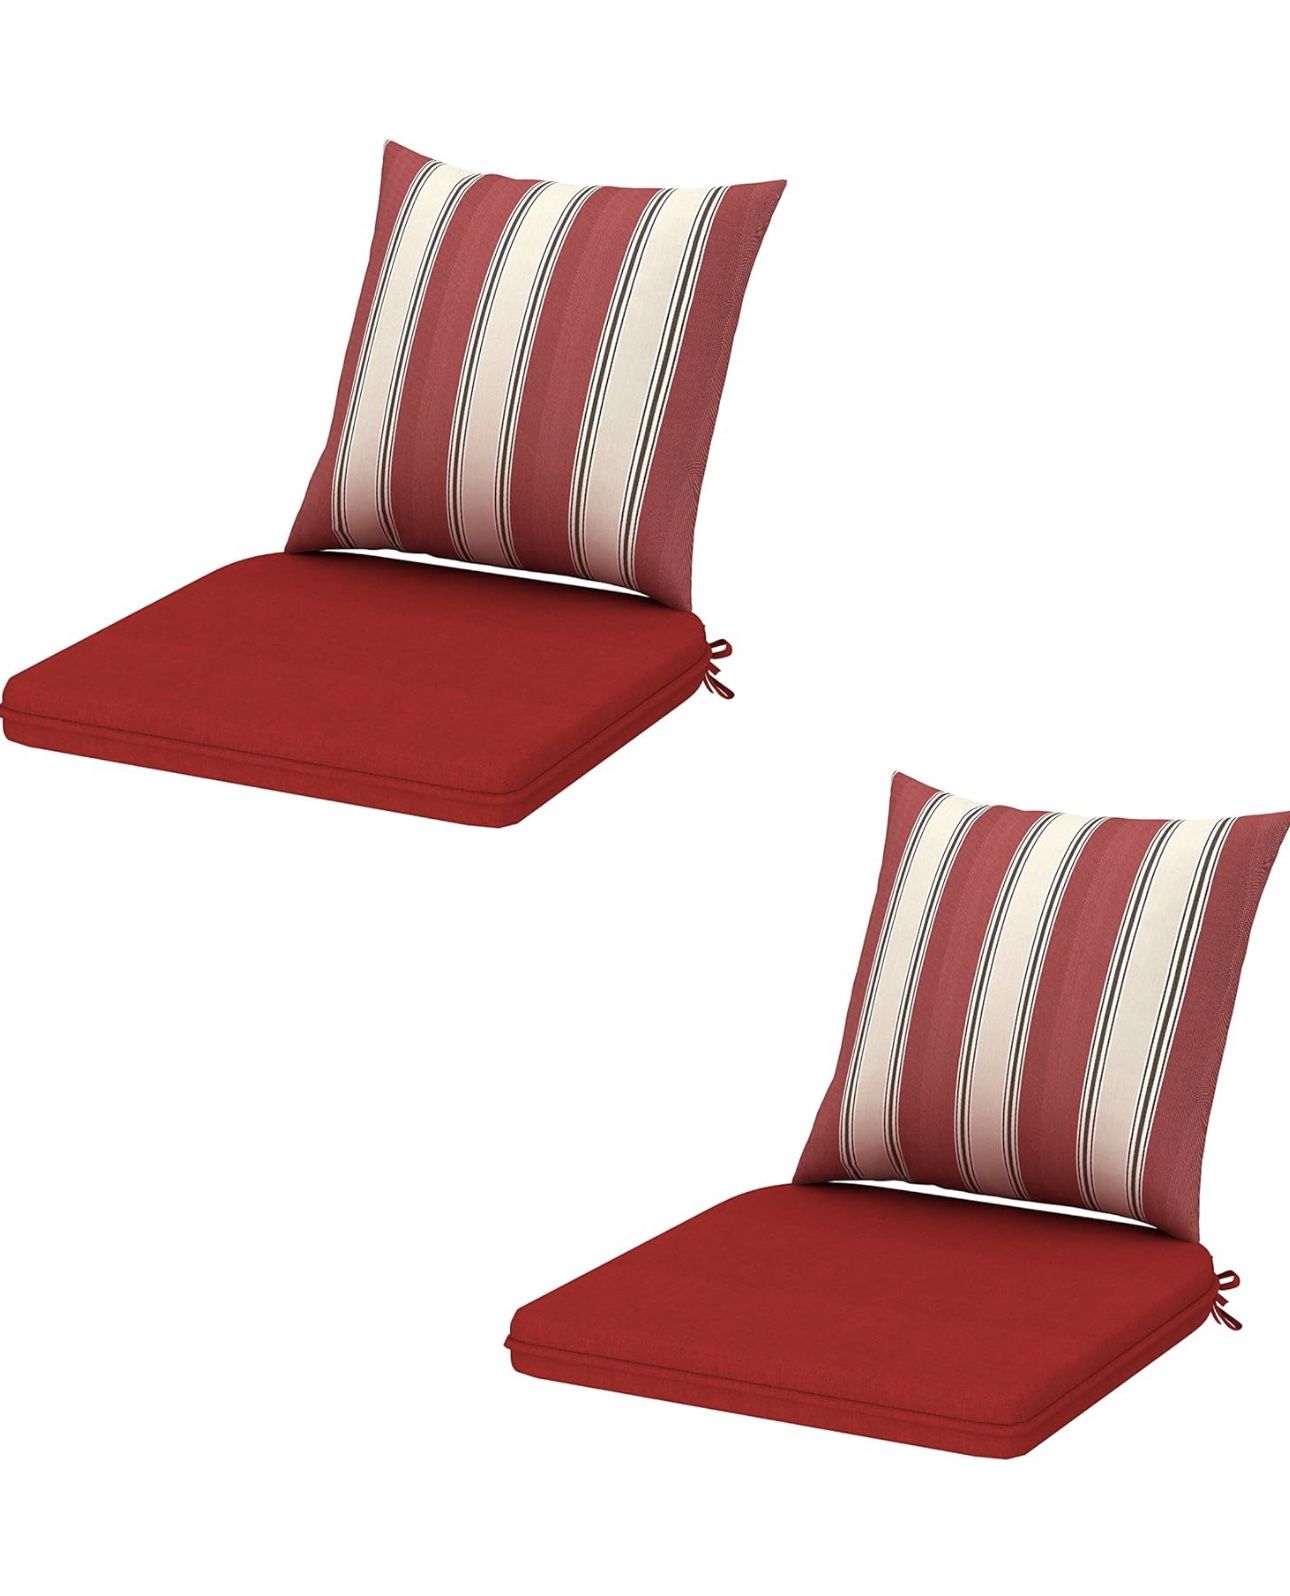 Indoor/Outdoor Seat Cushion Set, Deep Seat Bottom and Back Cushion for Chair, Sofa, and Couch, 17" x 16" (2 * Red)